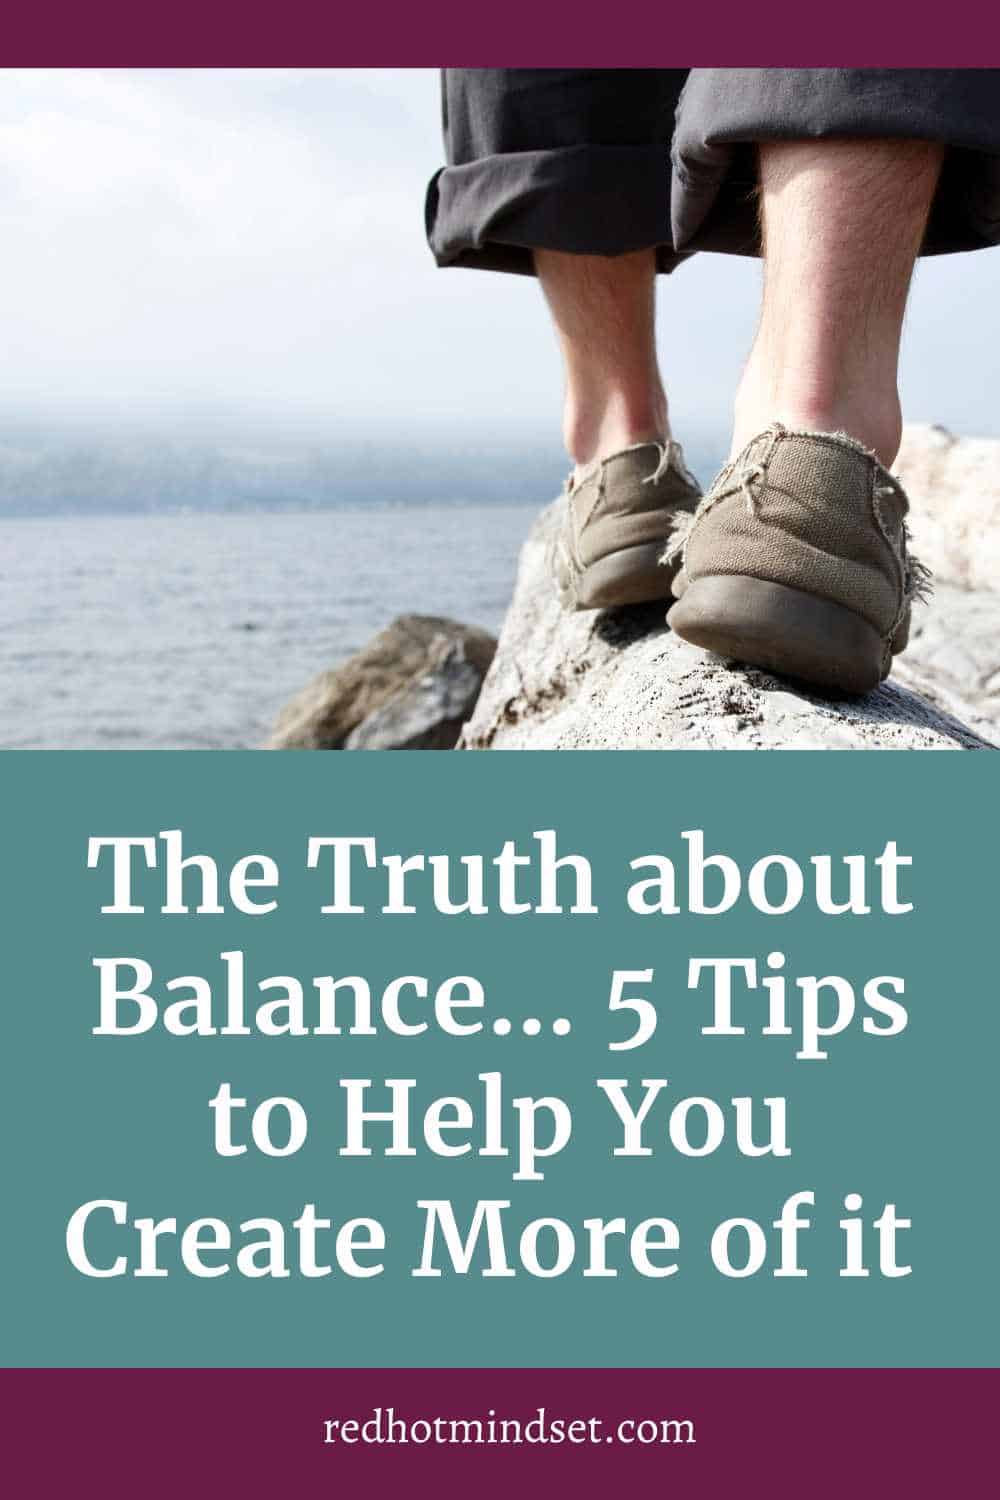 Ep 184 | The Truth about Balance – 5 Tips to Help You Create More of it in Your Life